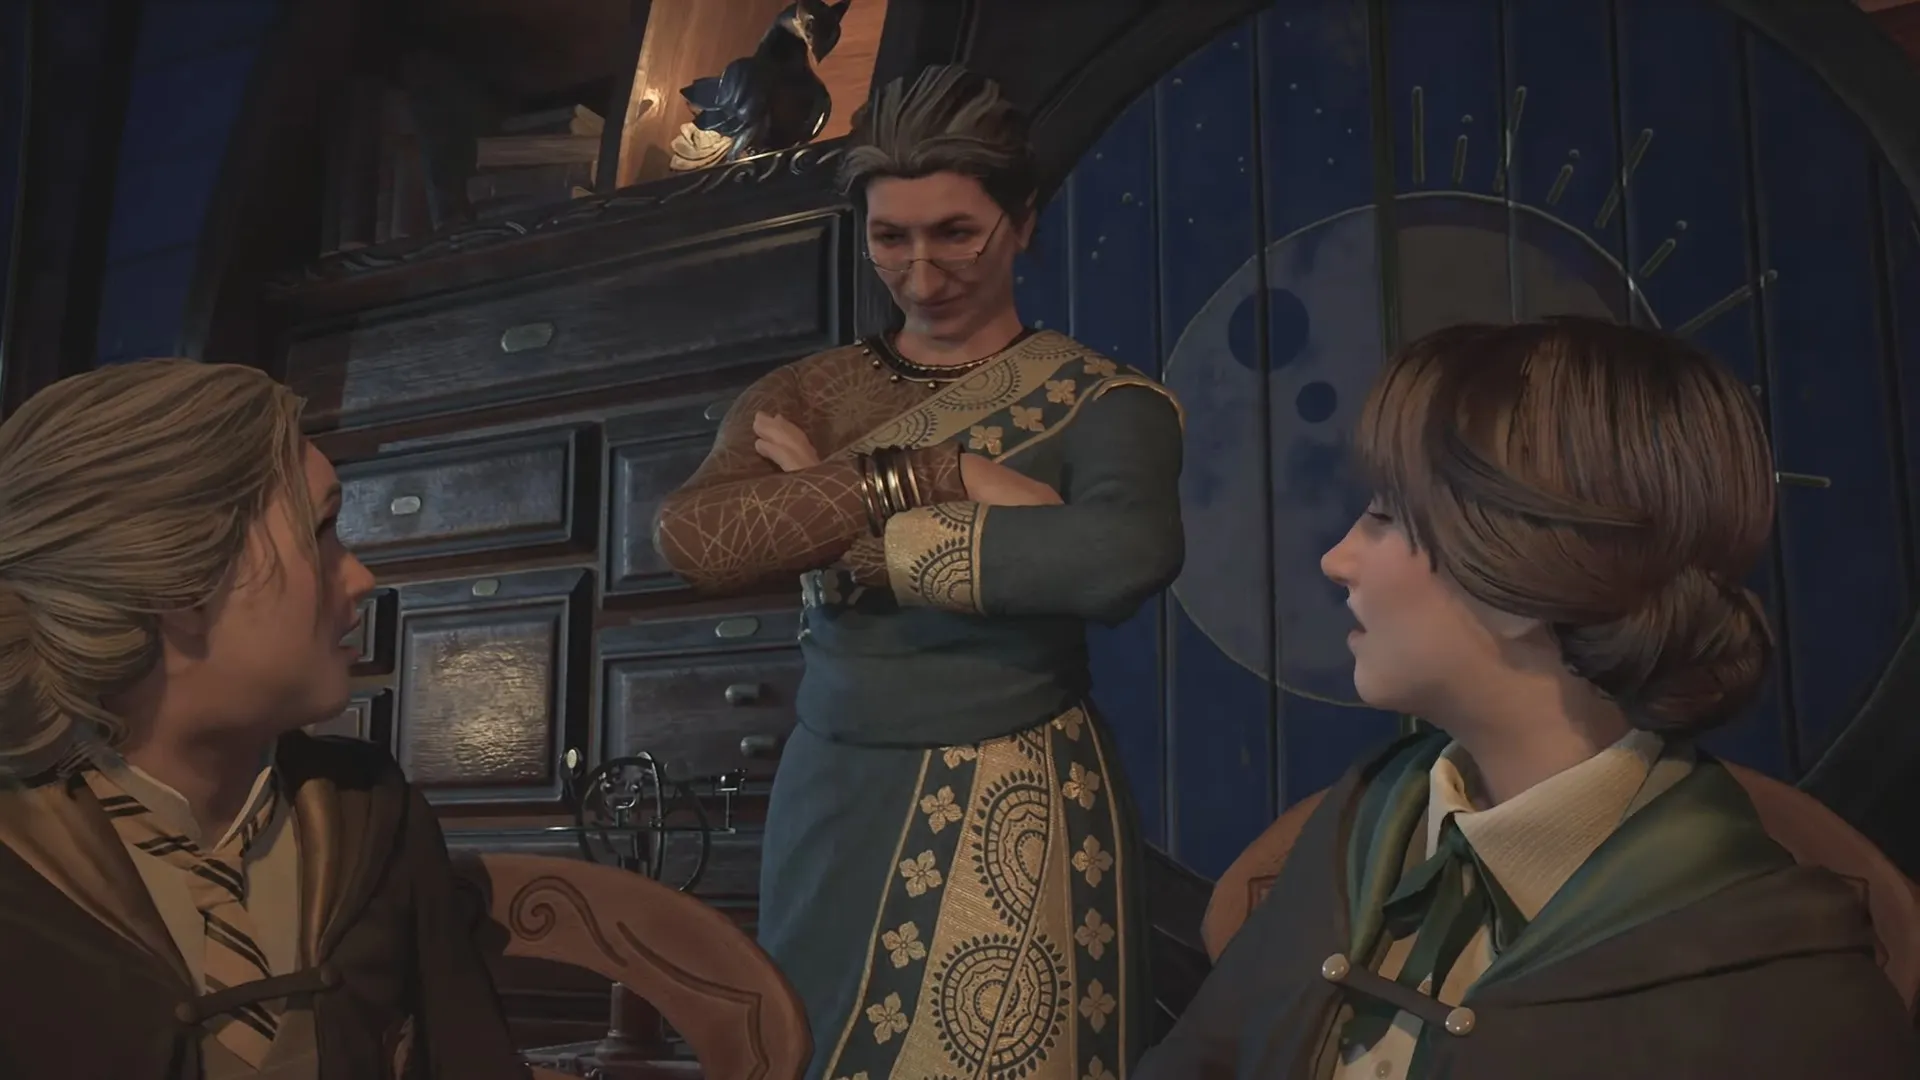 The new Harry Potter game is a hit. Here's why some trans gamers